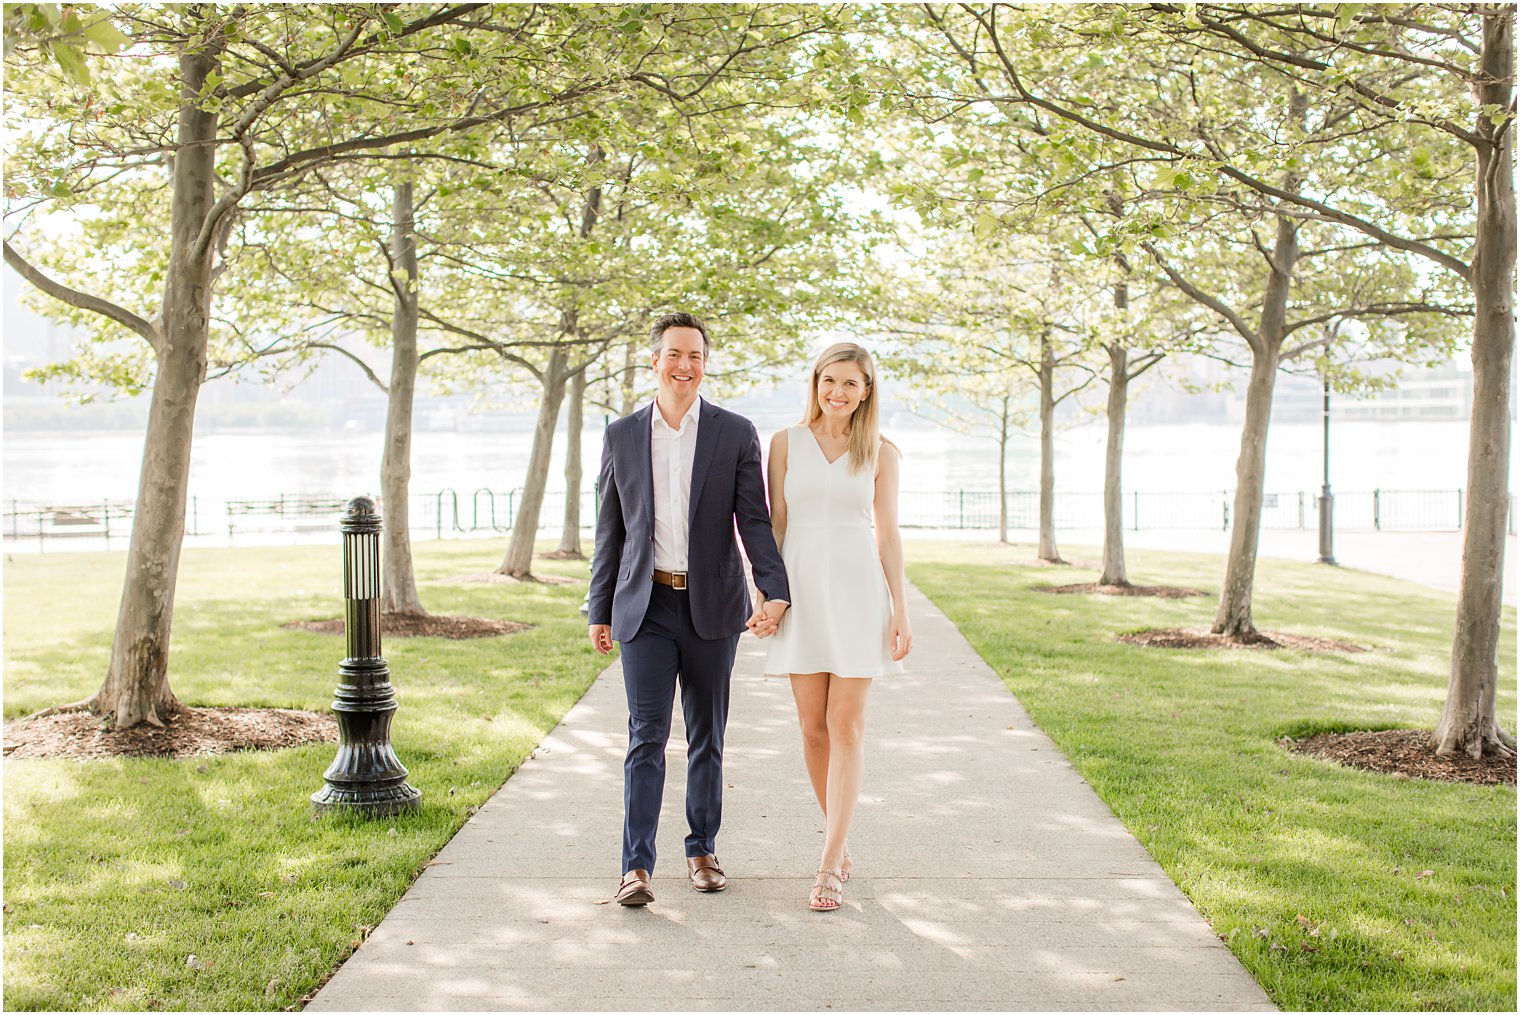 Bride and groom walking under tree canopy | Hoboken Rooftop Engagement by Idalia Photography